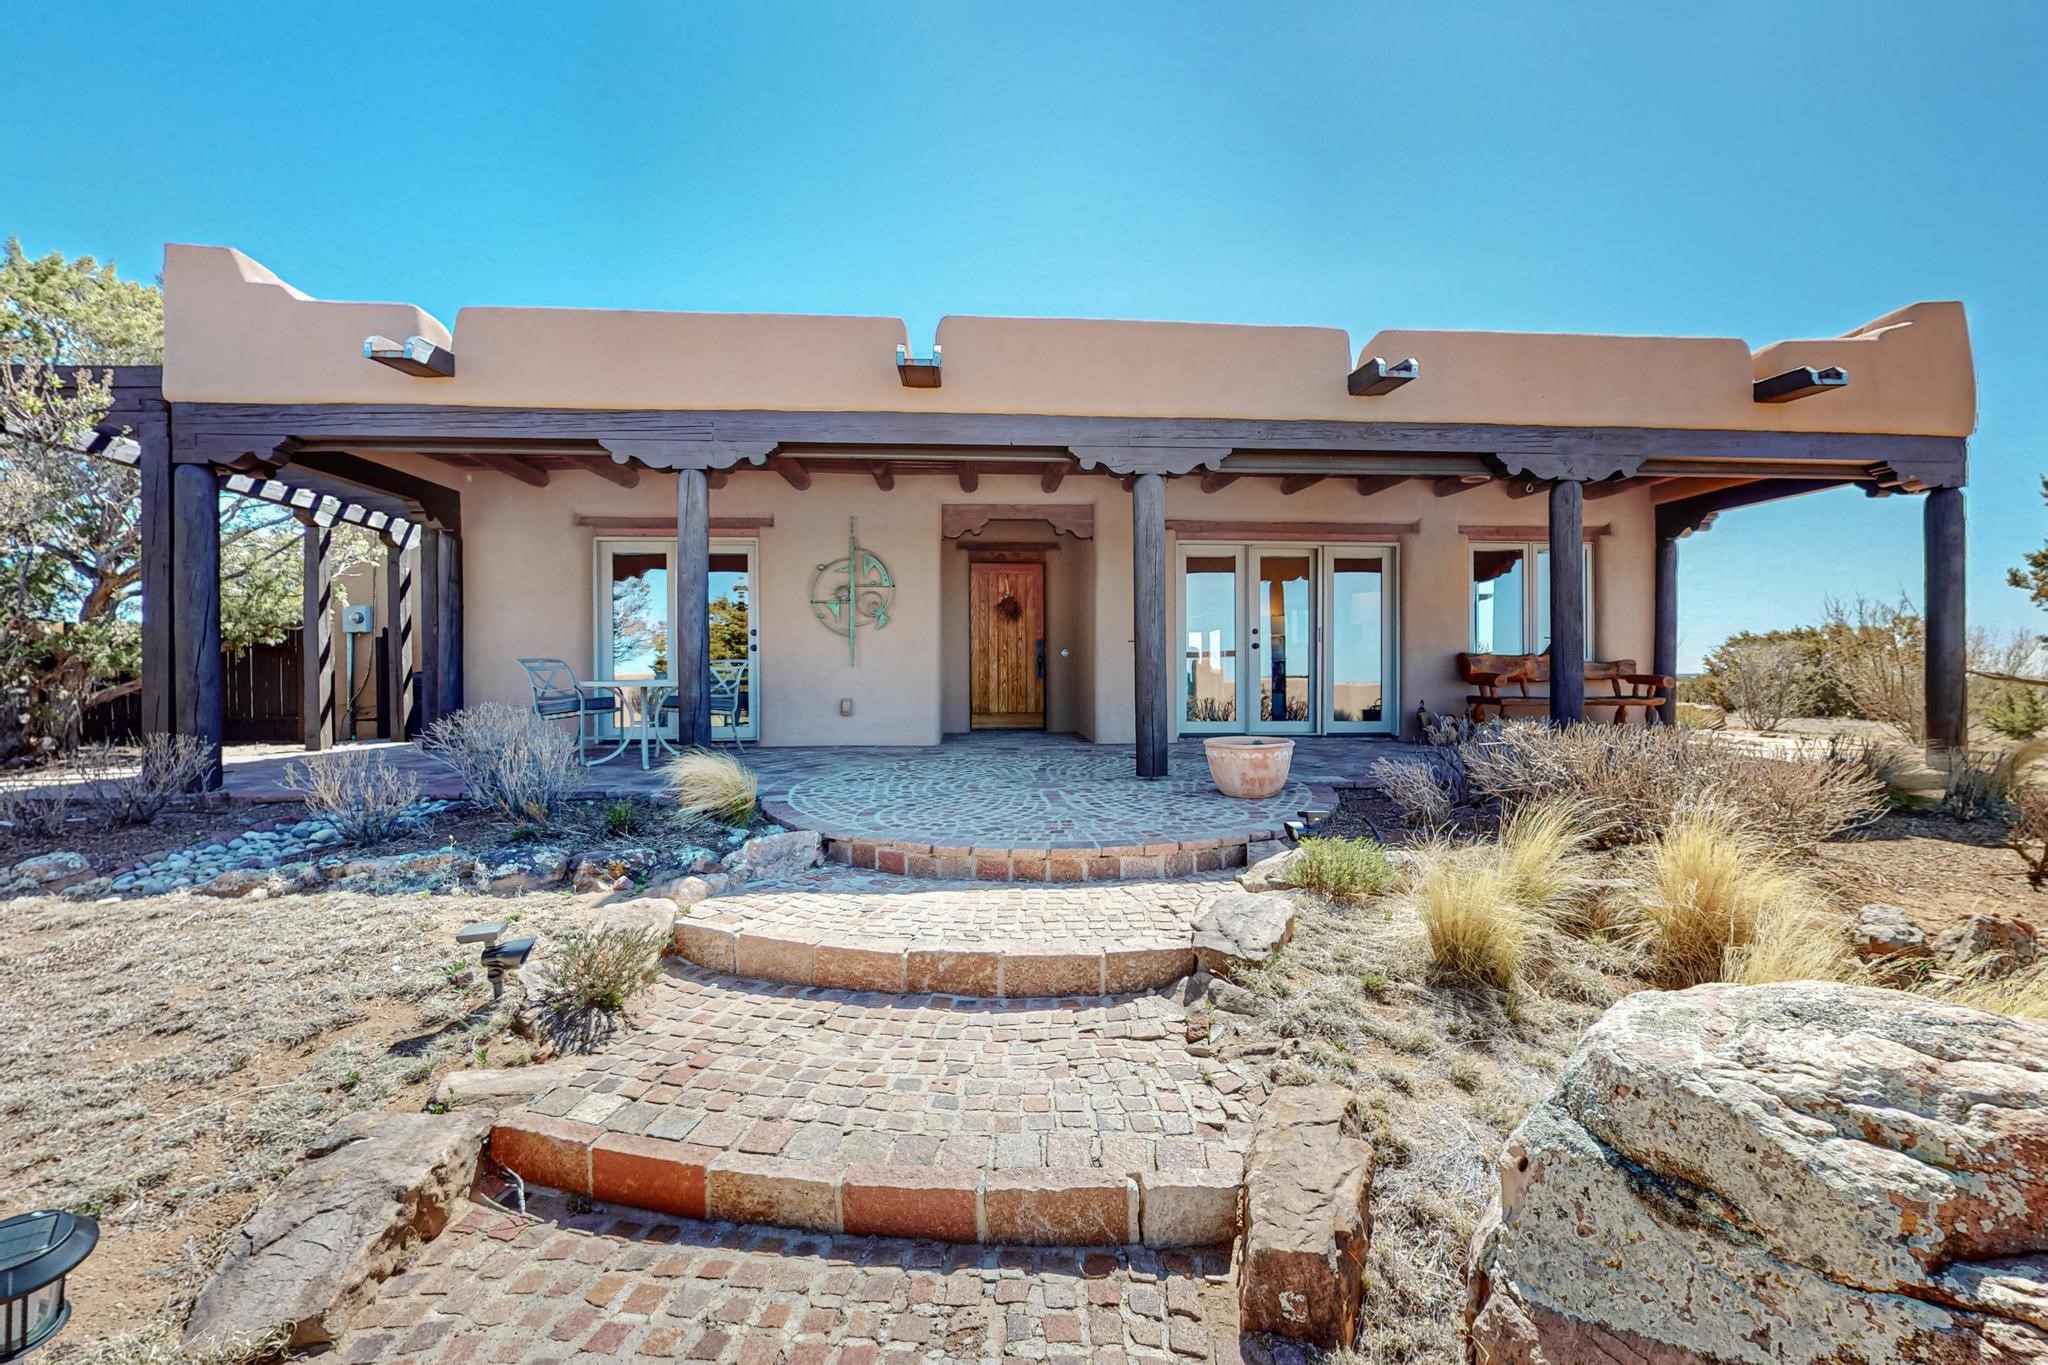 8 Aguila Place, Santa Fe, New Mexico 87508, 3 Bedrooms Bedrooms, ,2 BathroomsBathrooms,Residential,For Sale,8 Aguila Place,202401080